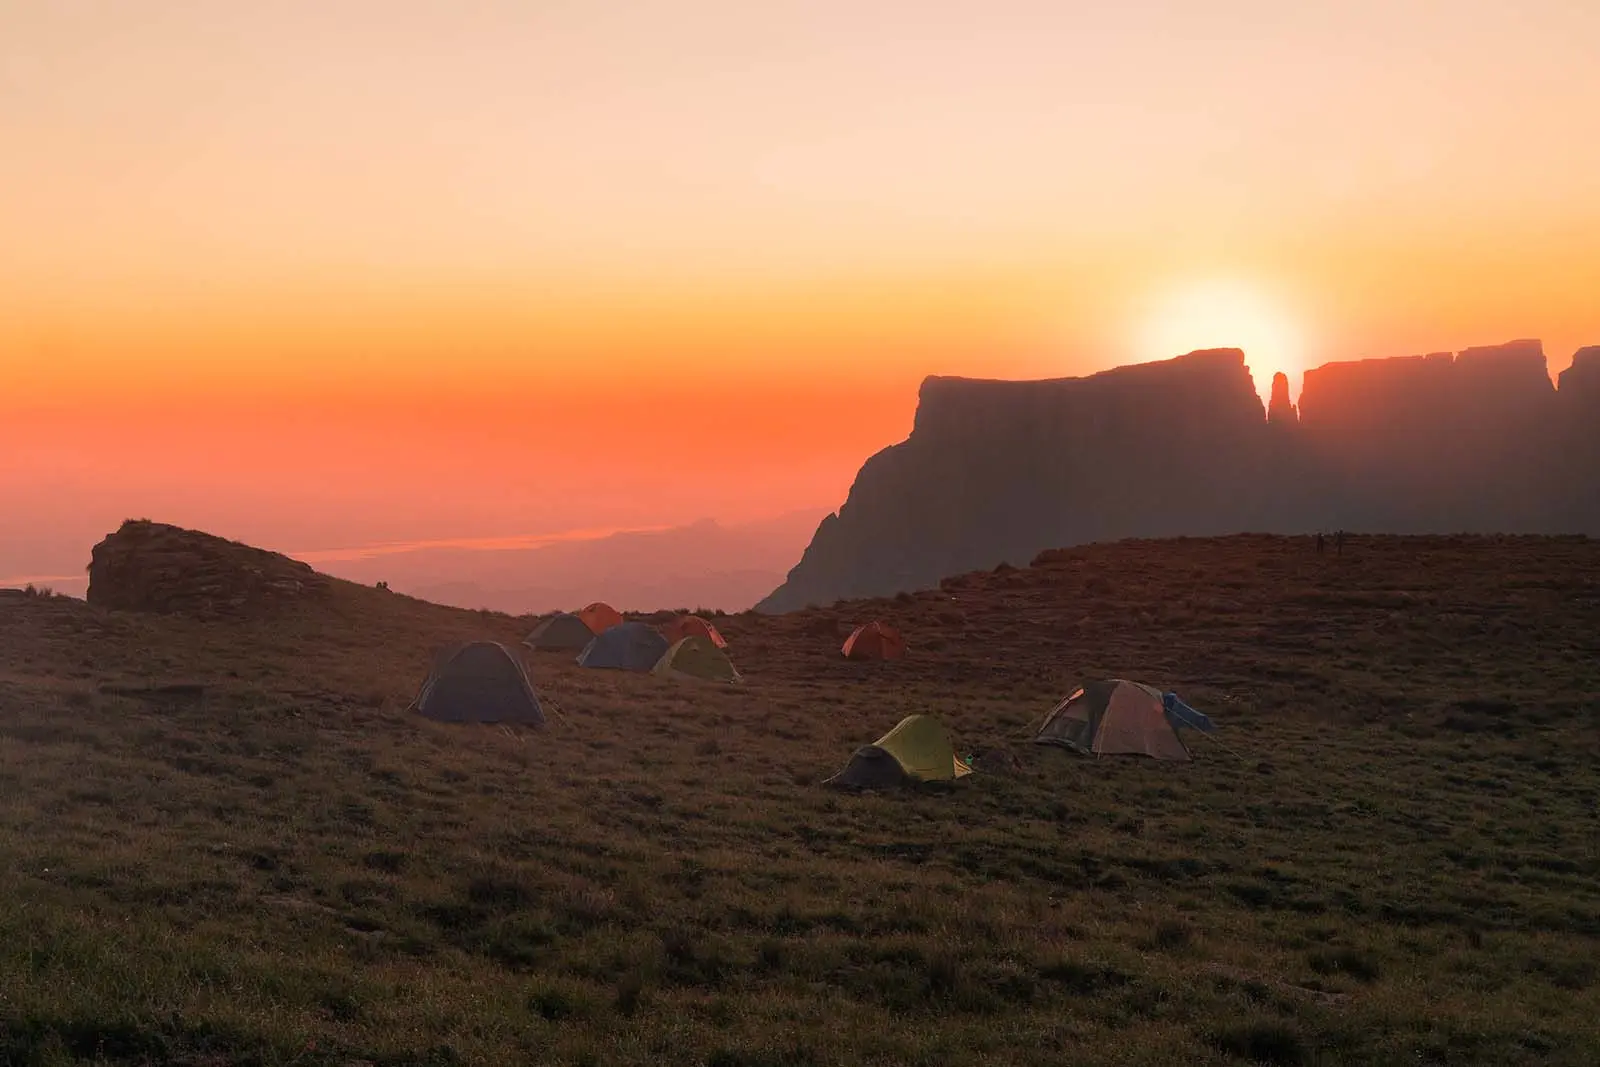 Tents standing in a mountainscape at sunset.